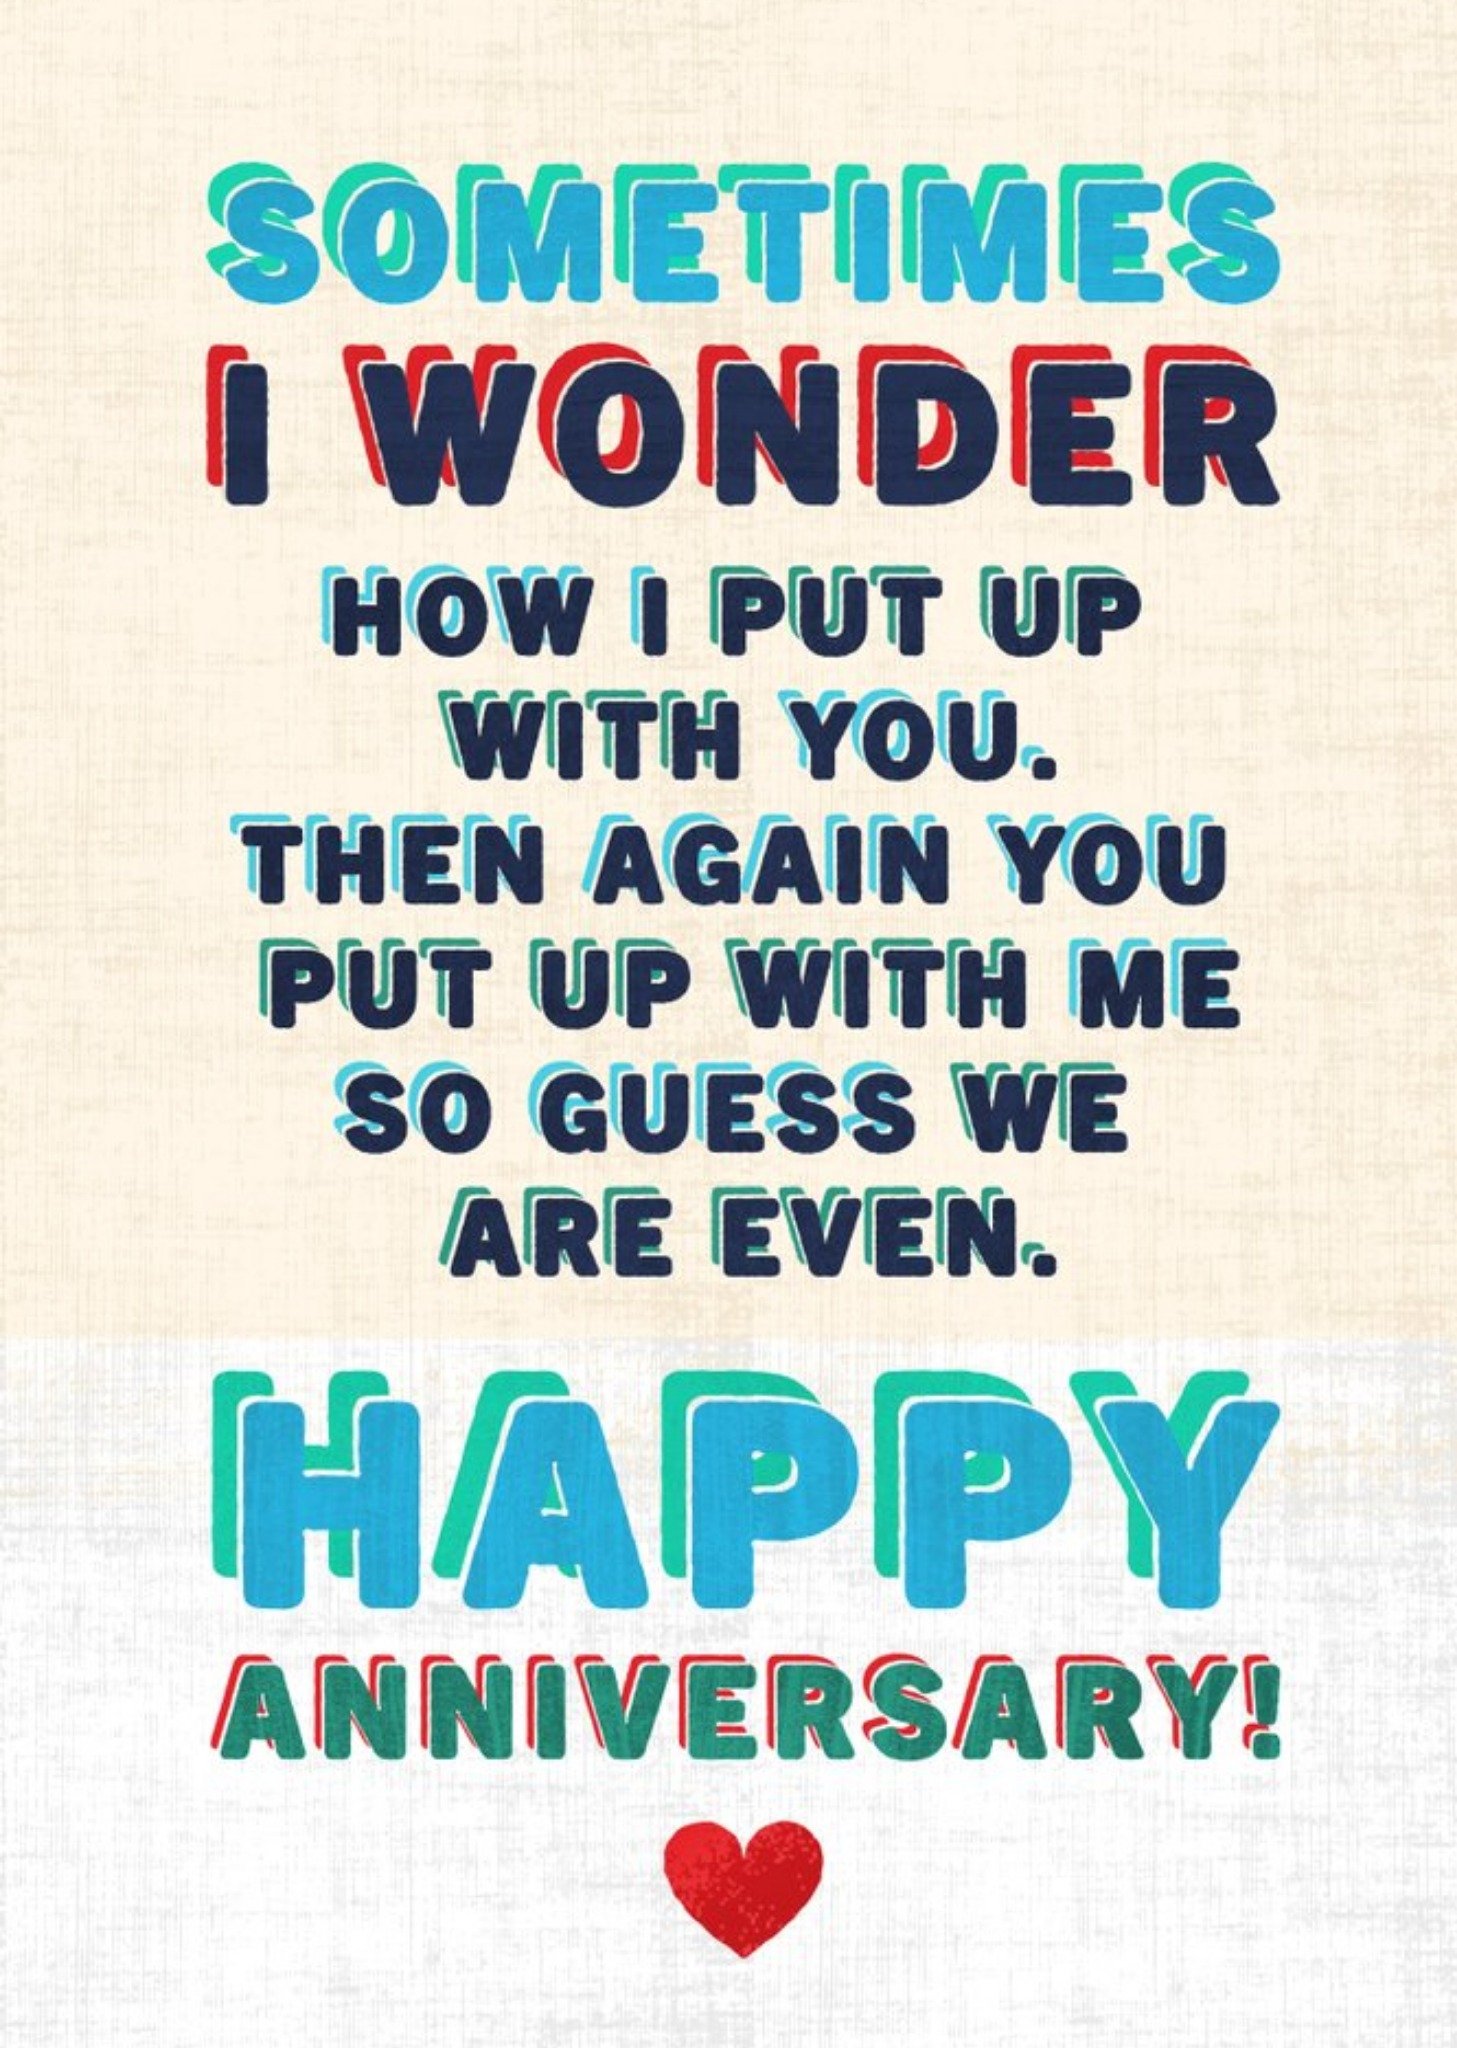 Moonpig Sometimes I Wonder How I Put Up With You Then Again You Put Up With Me Anniversary Card Ecar